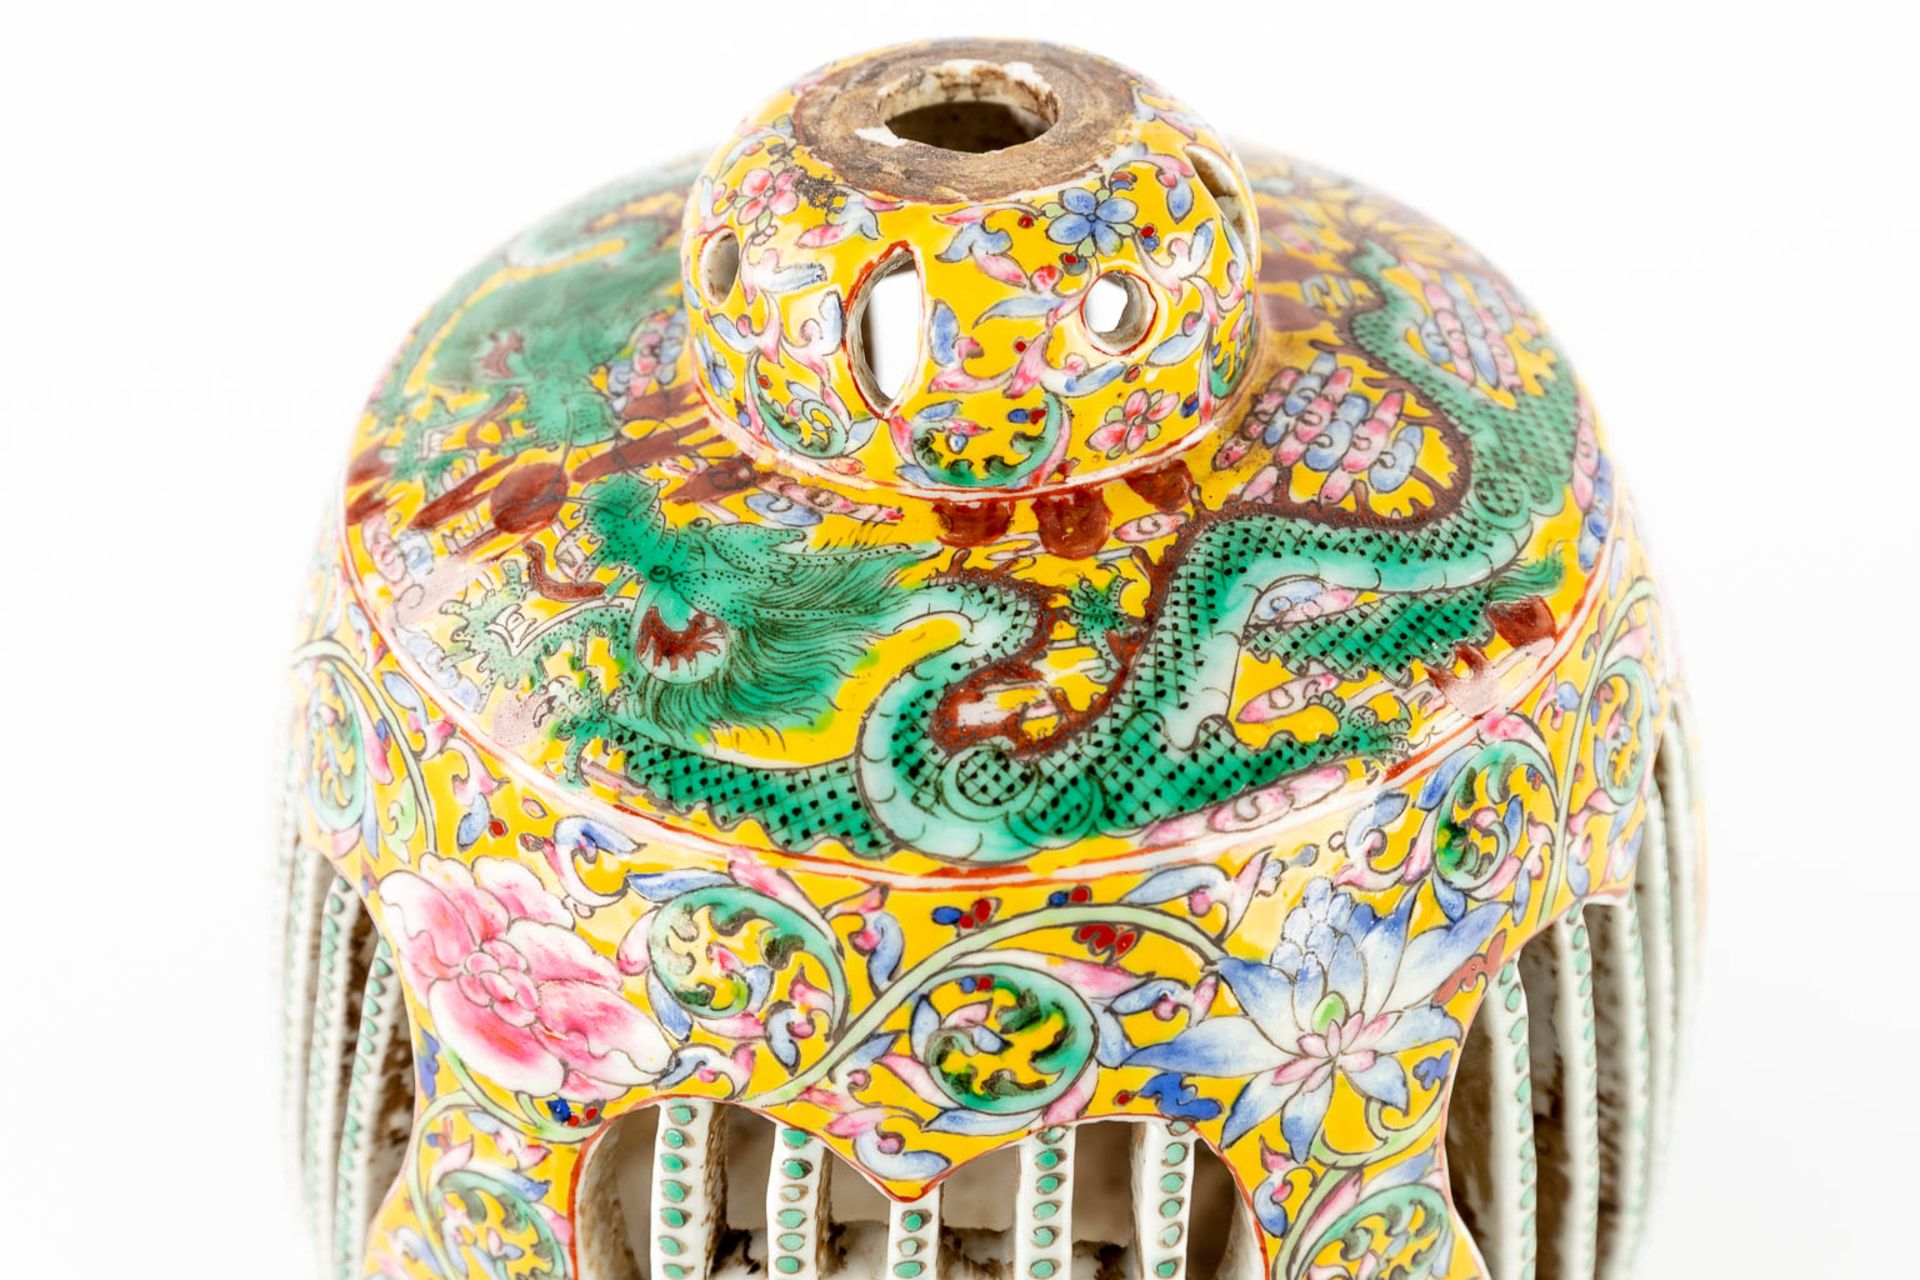 A Chinese porcelain 'Bird Cage', Famille Rose, Qianlong Mark. 20th C. (H:25 x D:19 cm) - Image 11 of 12